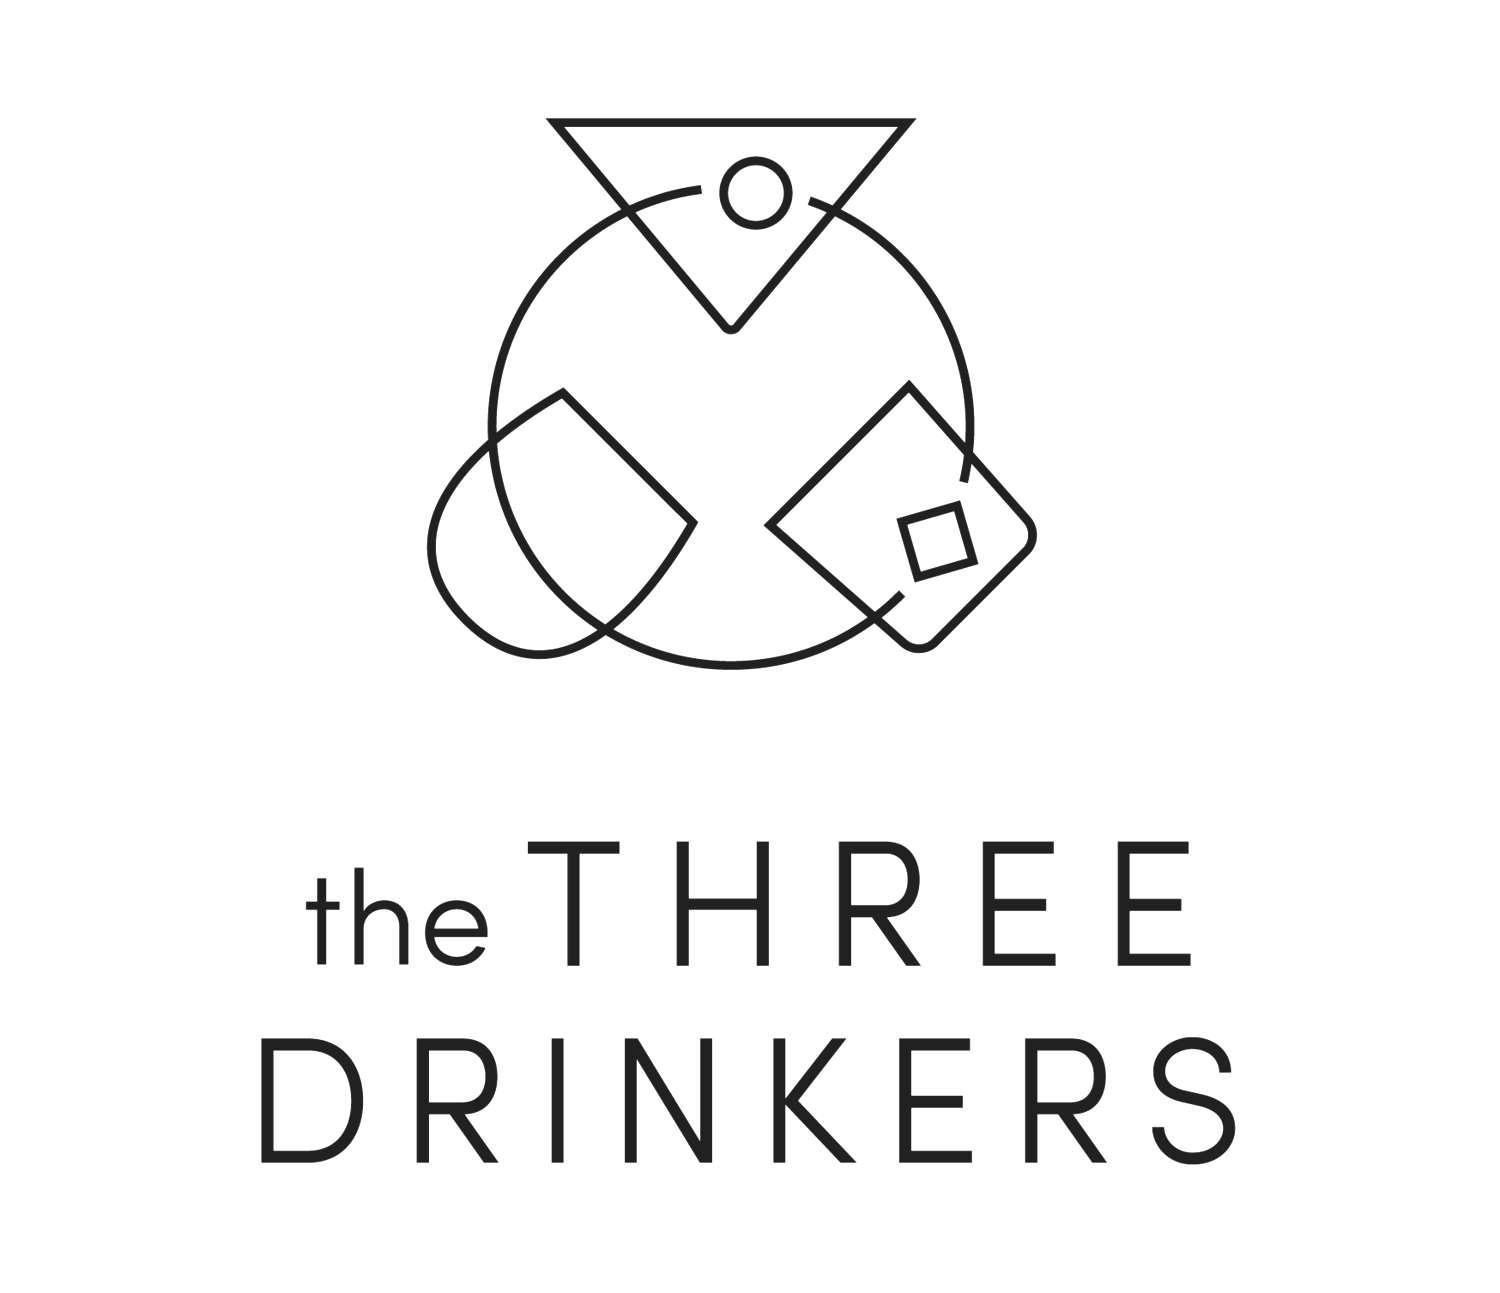 The Three Drinkers